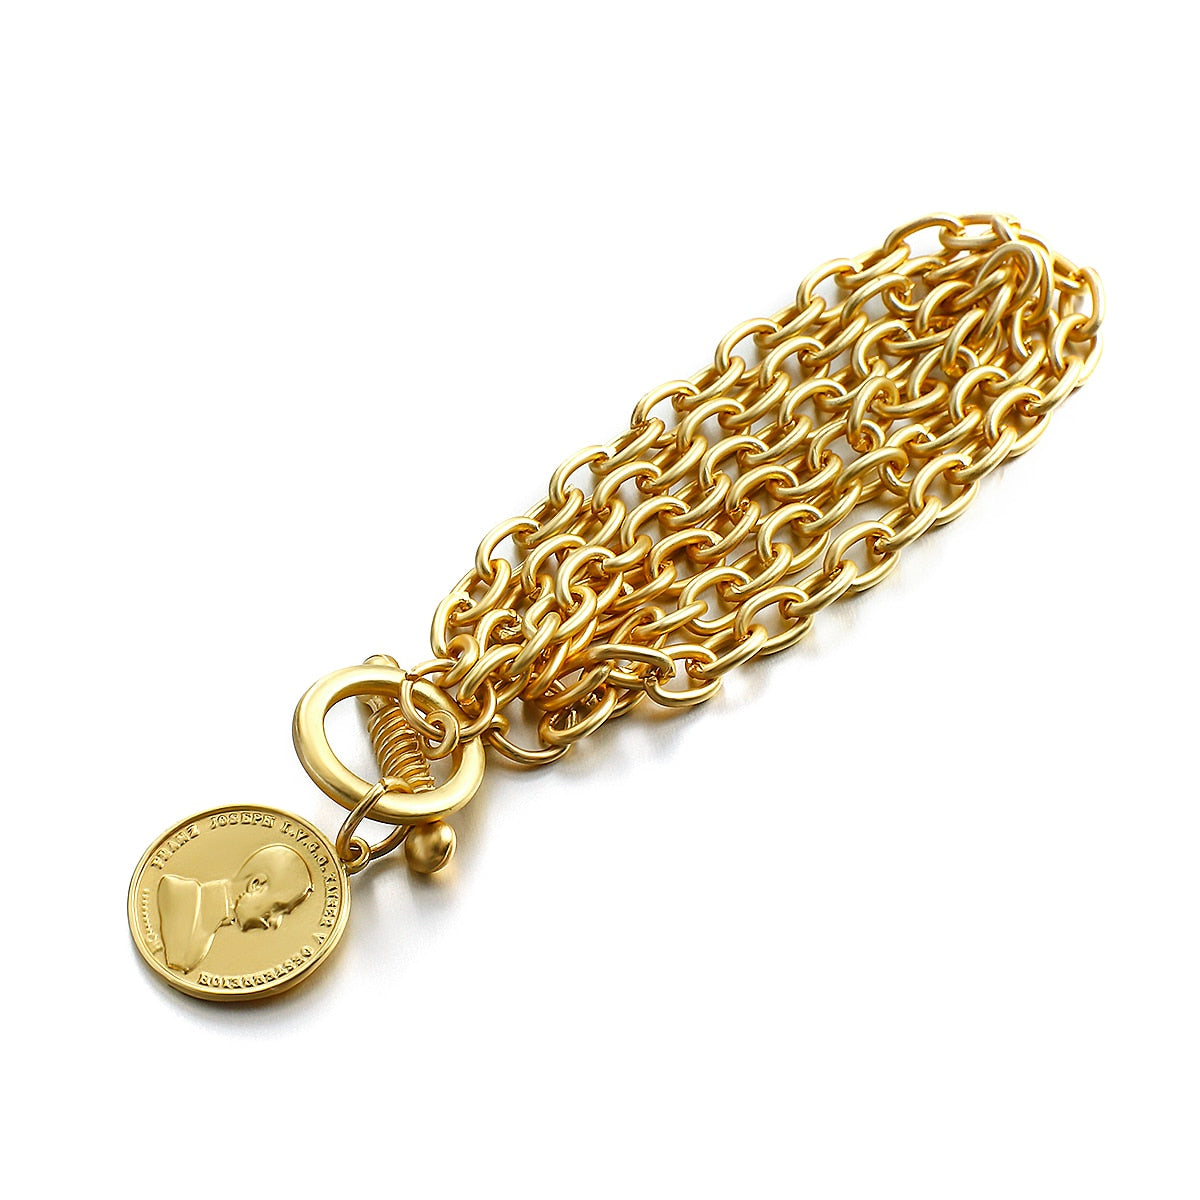 Portrait Coin Bracelets Jewelry  For Women in Gold Color